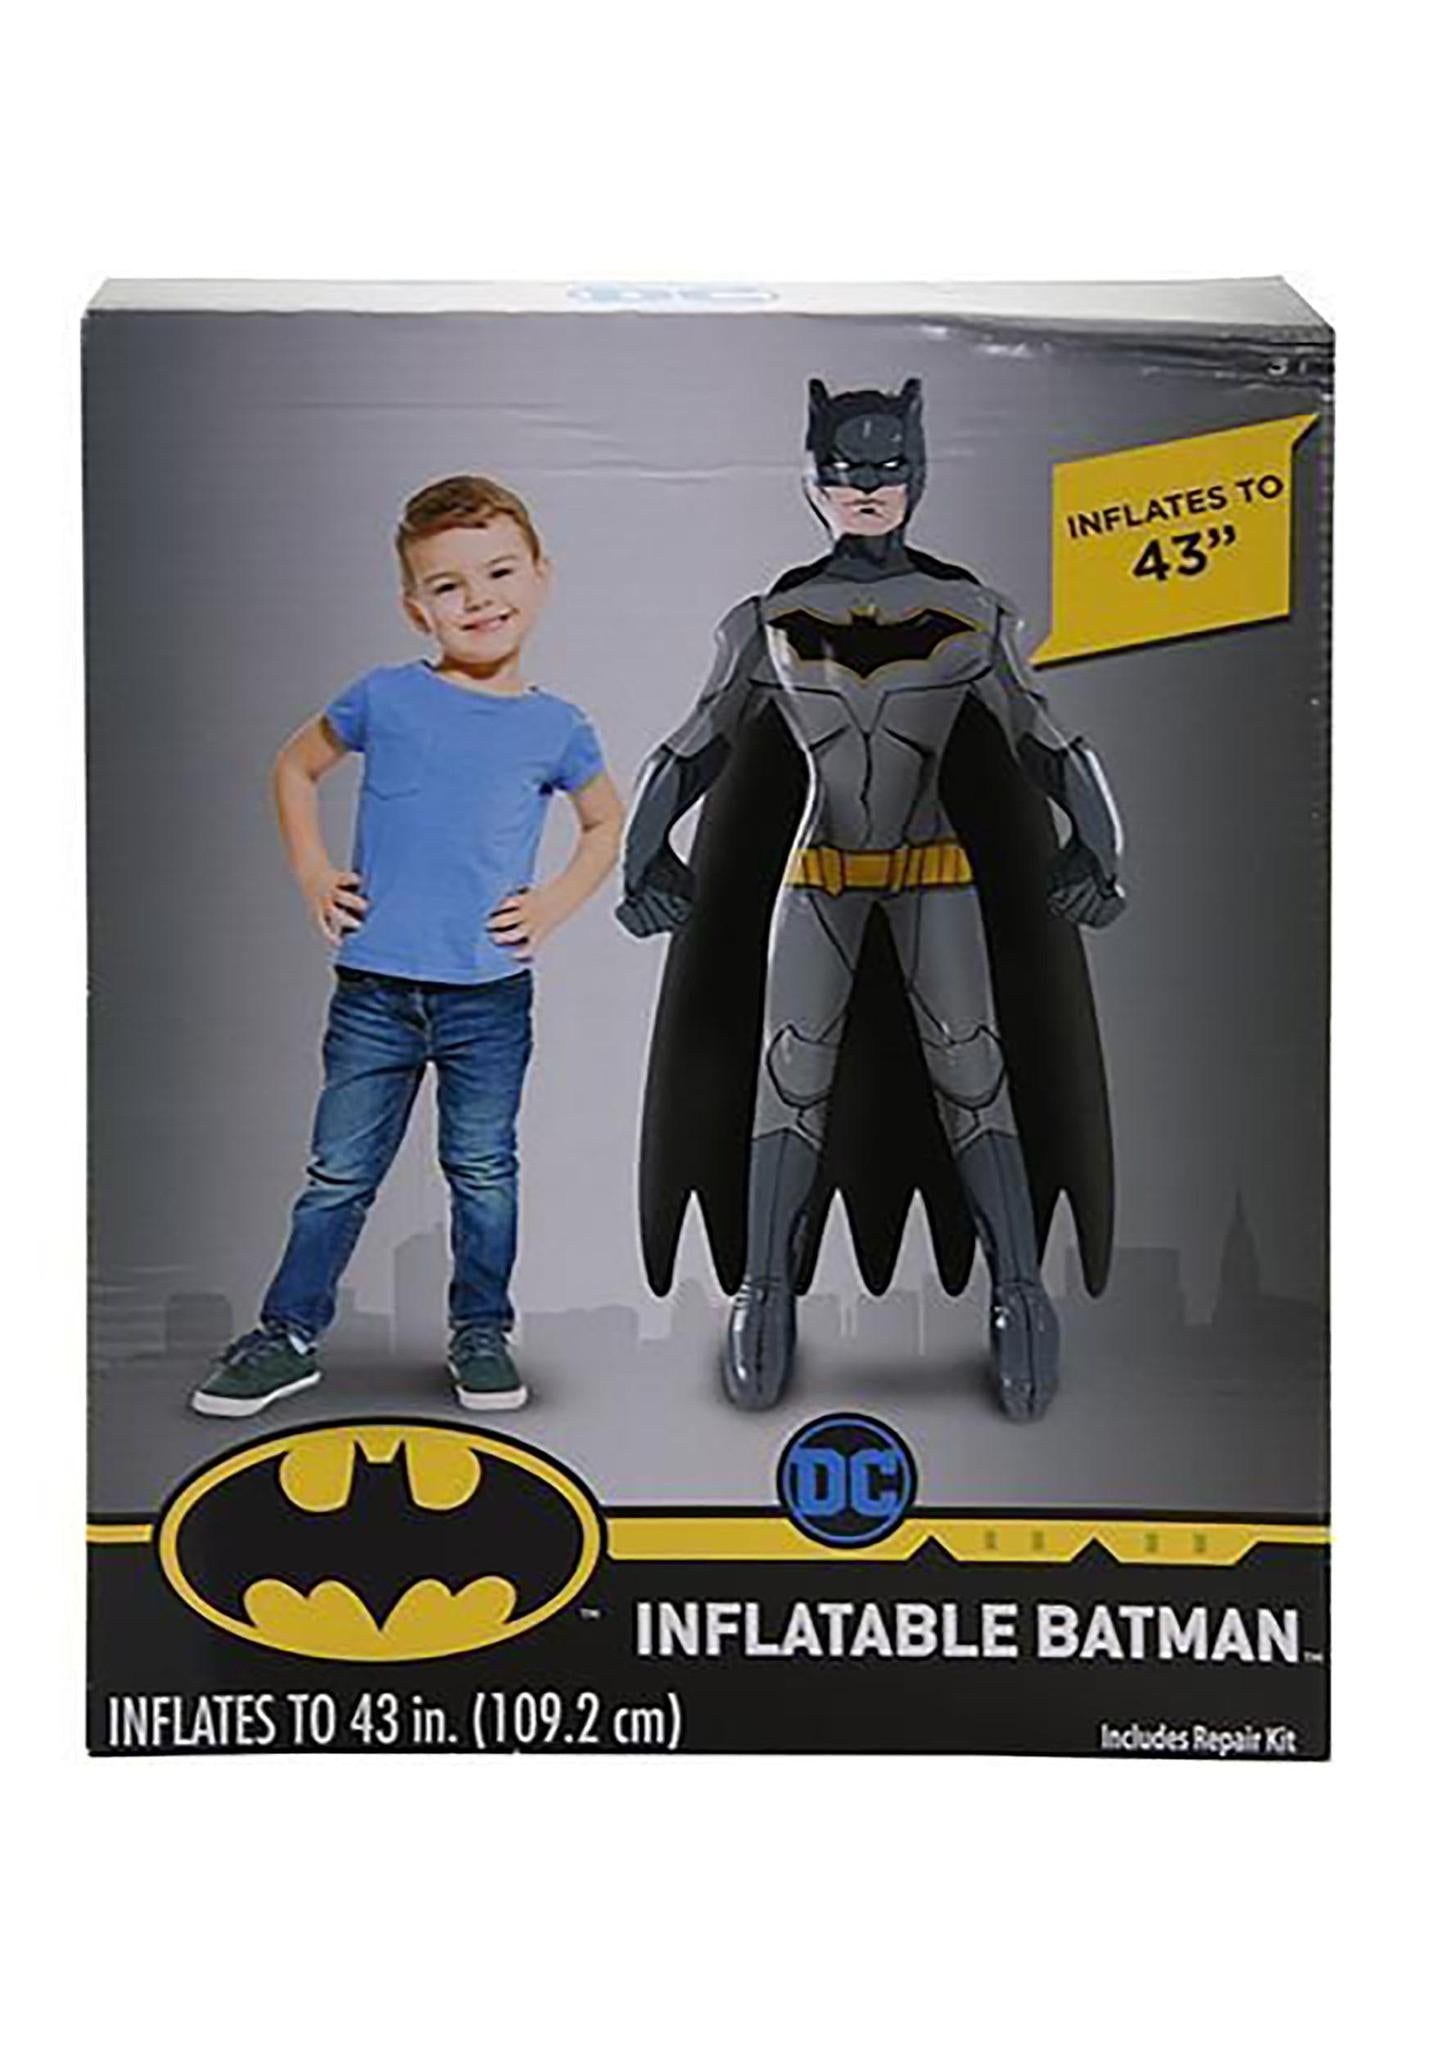 WHAT KIDS WANT! Party Favors Batman Super Size 43' Inflatable Character